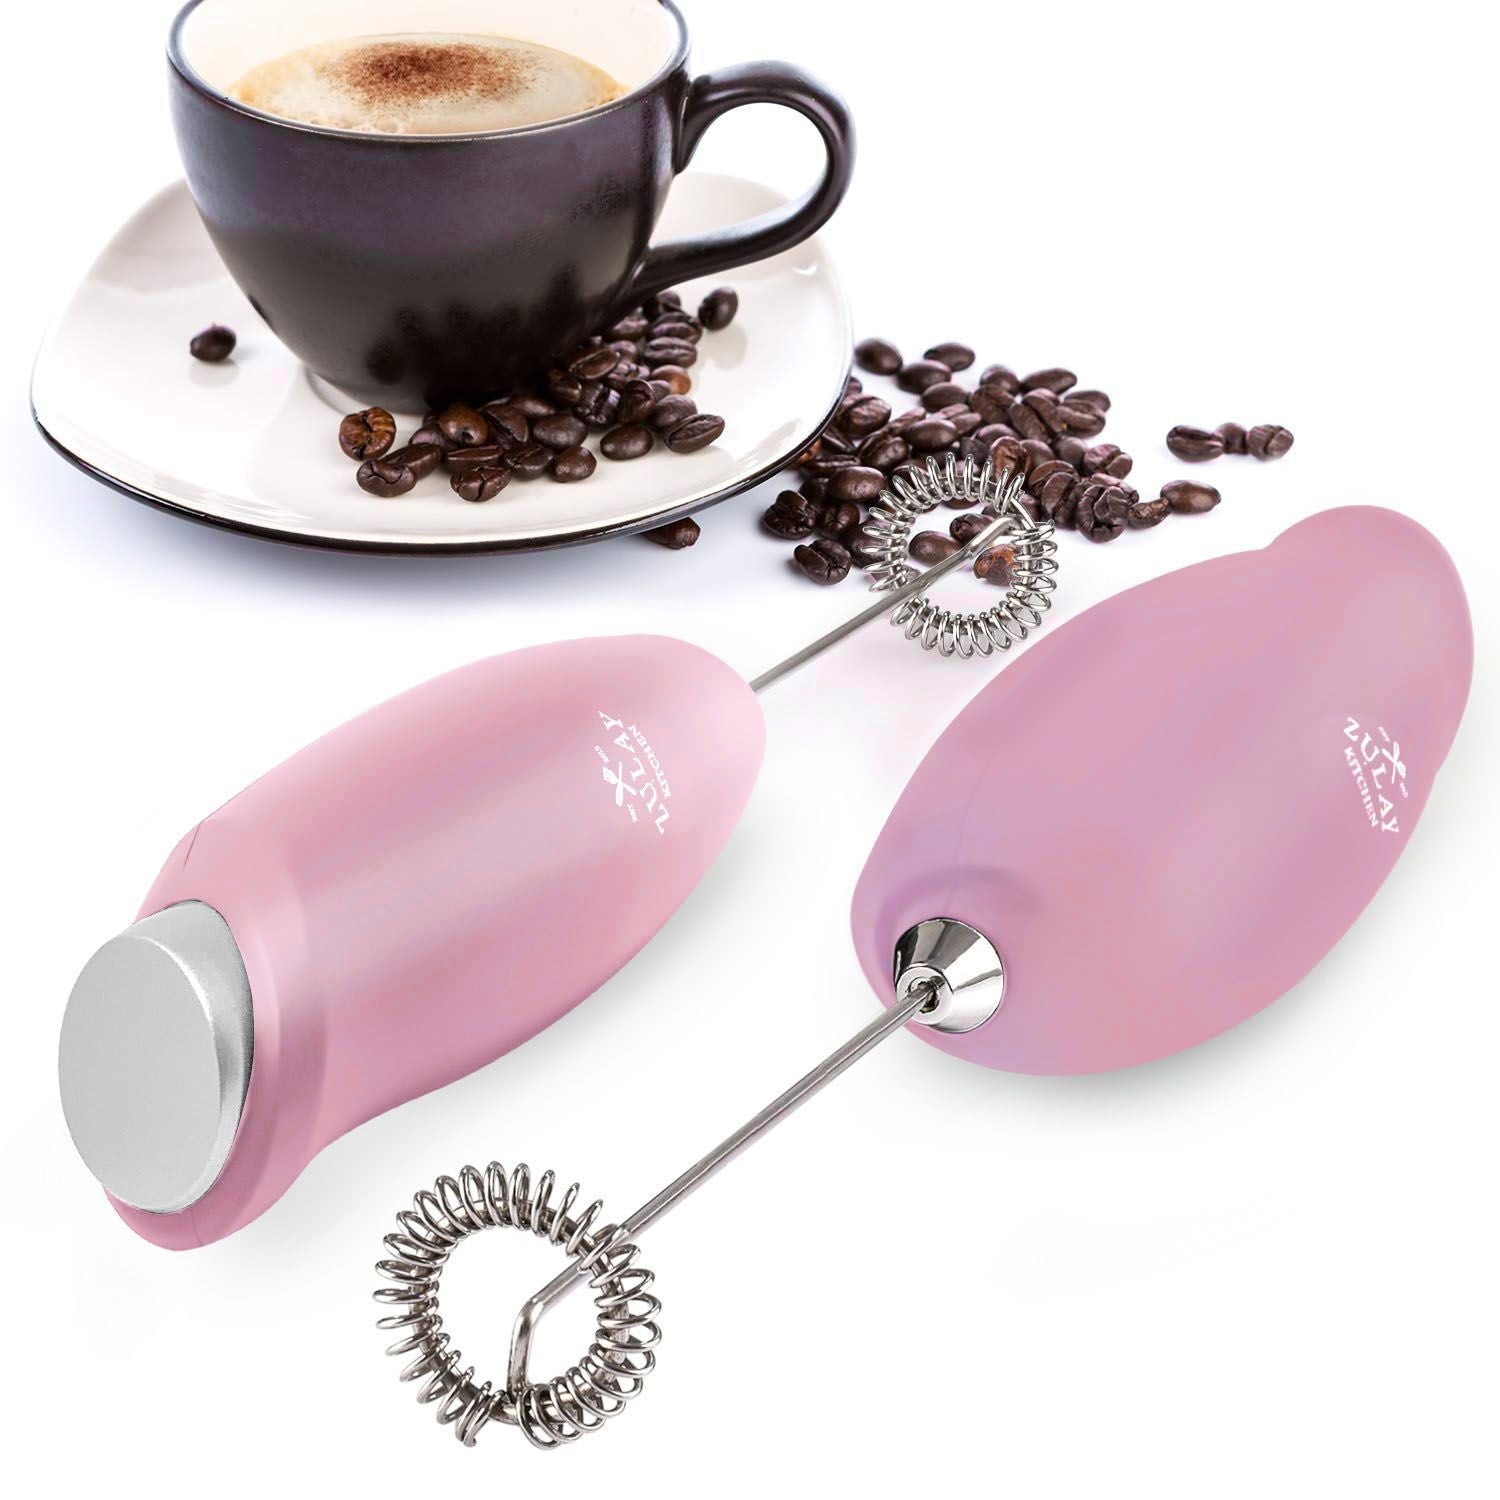 Zulay Kitchen High Powered Milk Frother Foam Maker with Stand Pink/Gold  B07P8W48HV With Stand - Yahoo Shopping